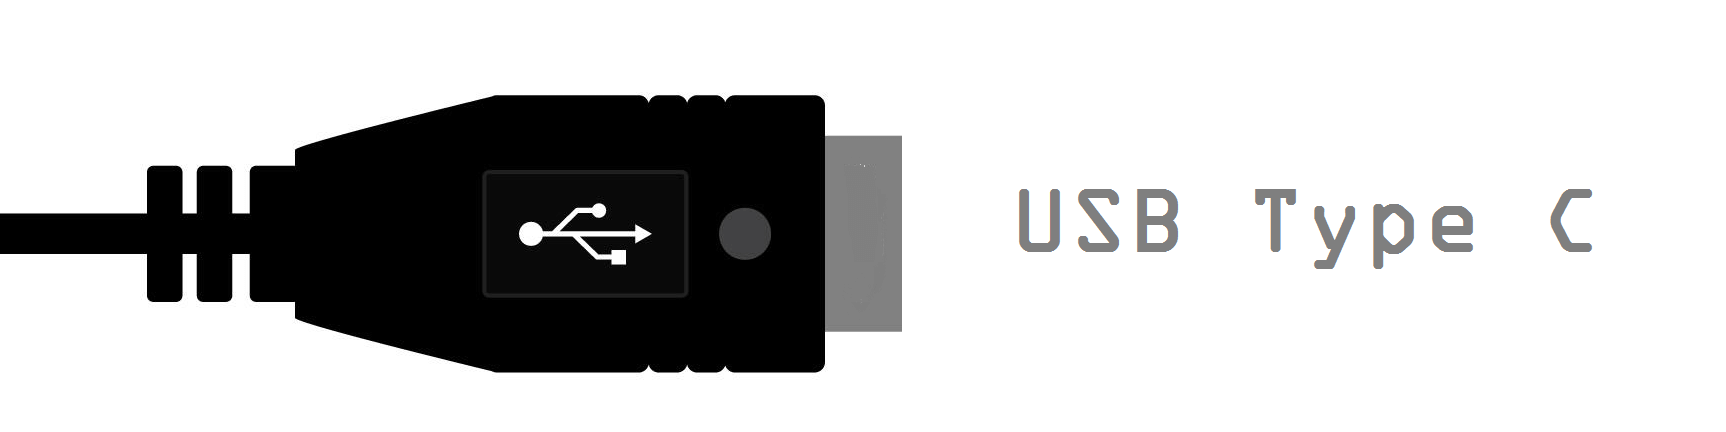 USB-type-c-title.png